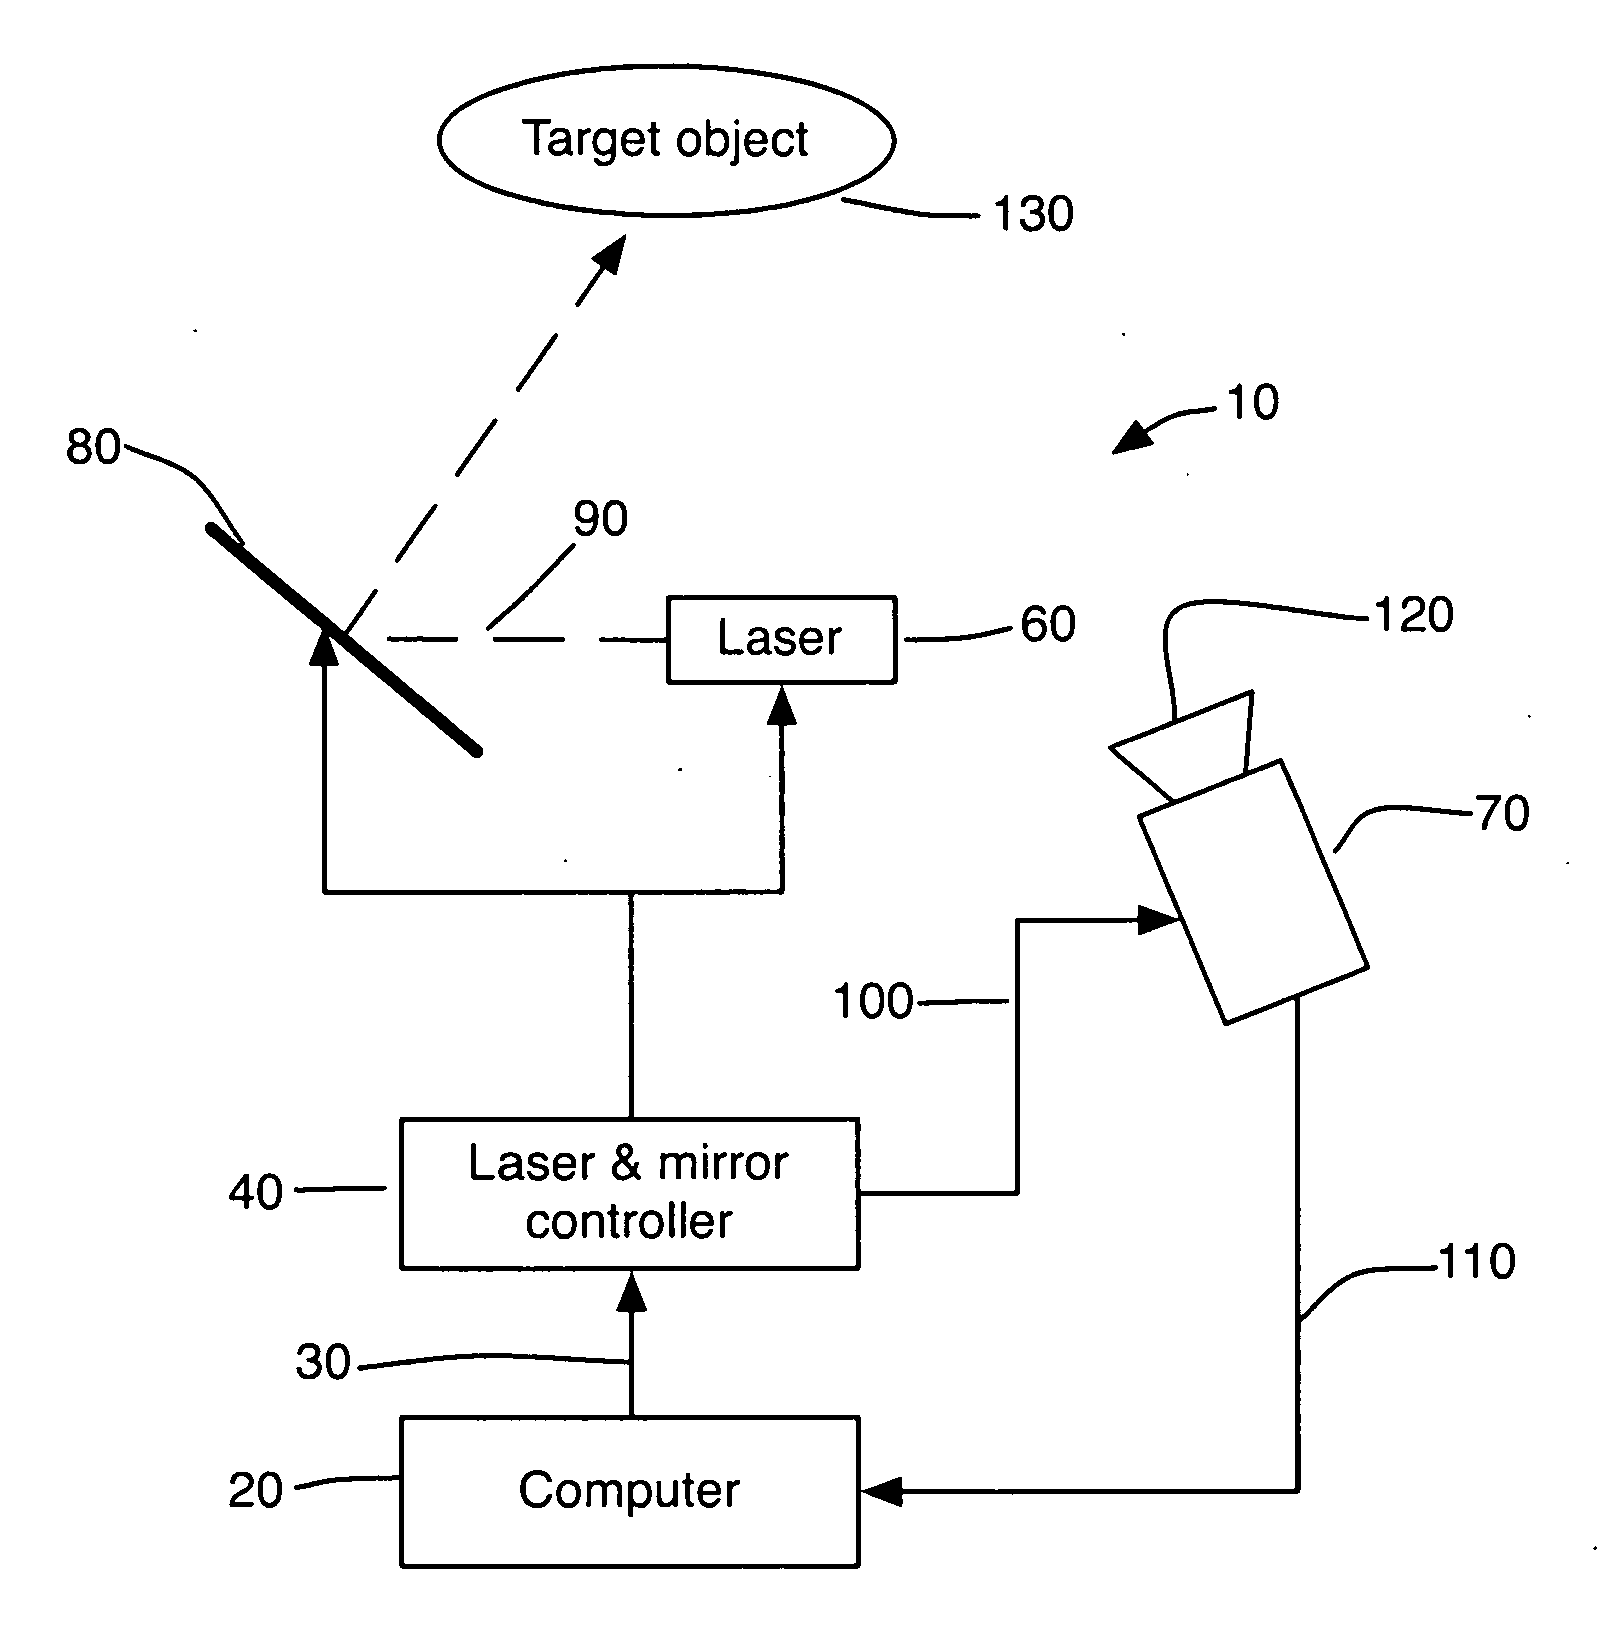 Method and System for 3D Imaging Using a Spacetime Coded Laser Projection System